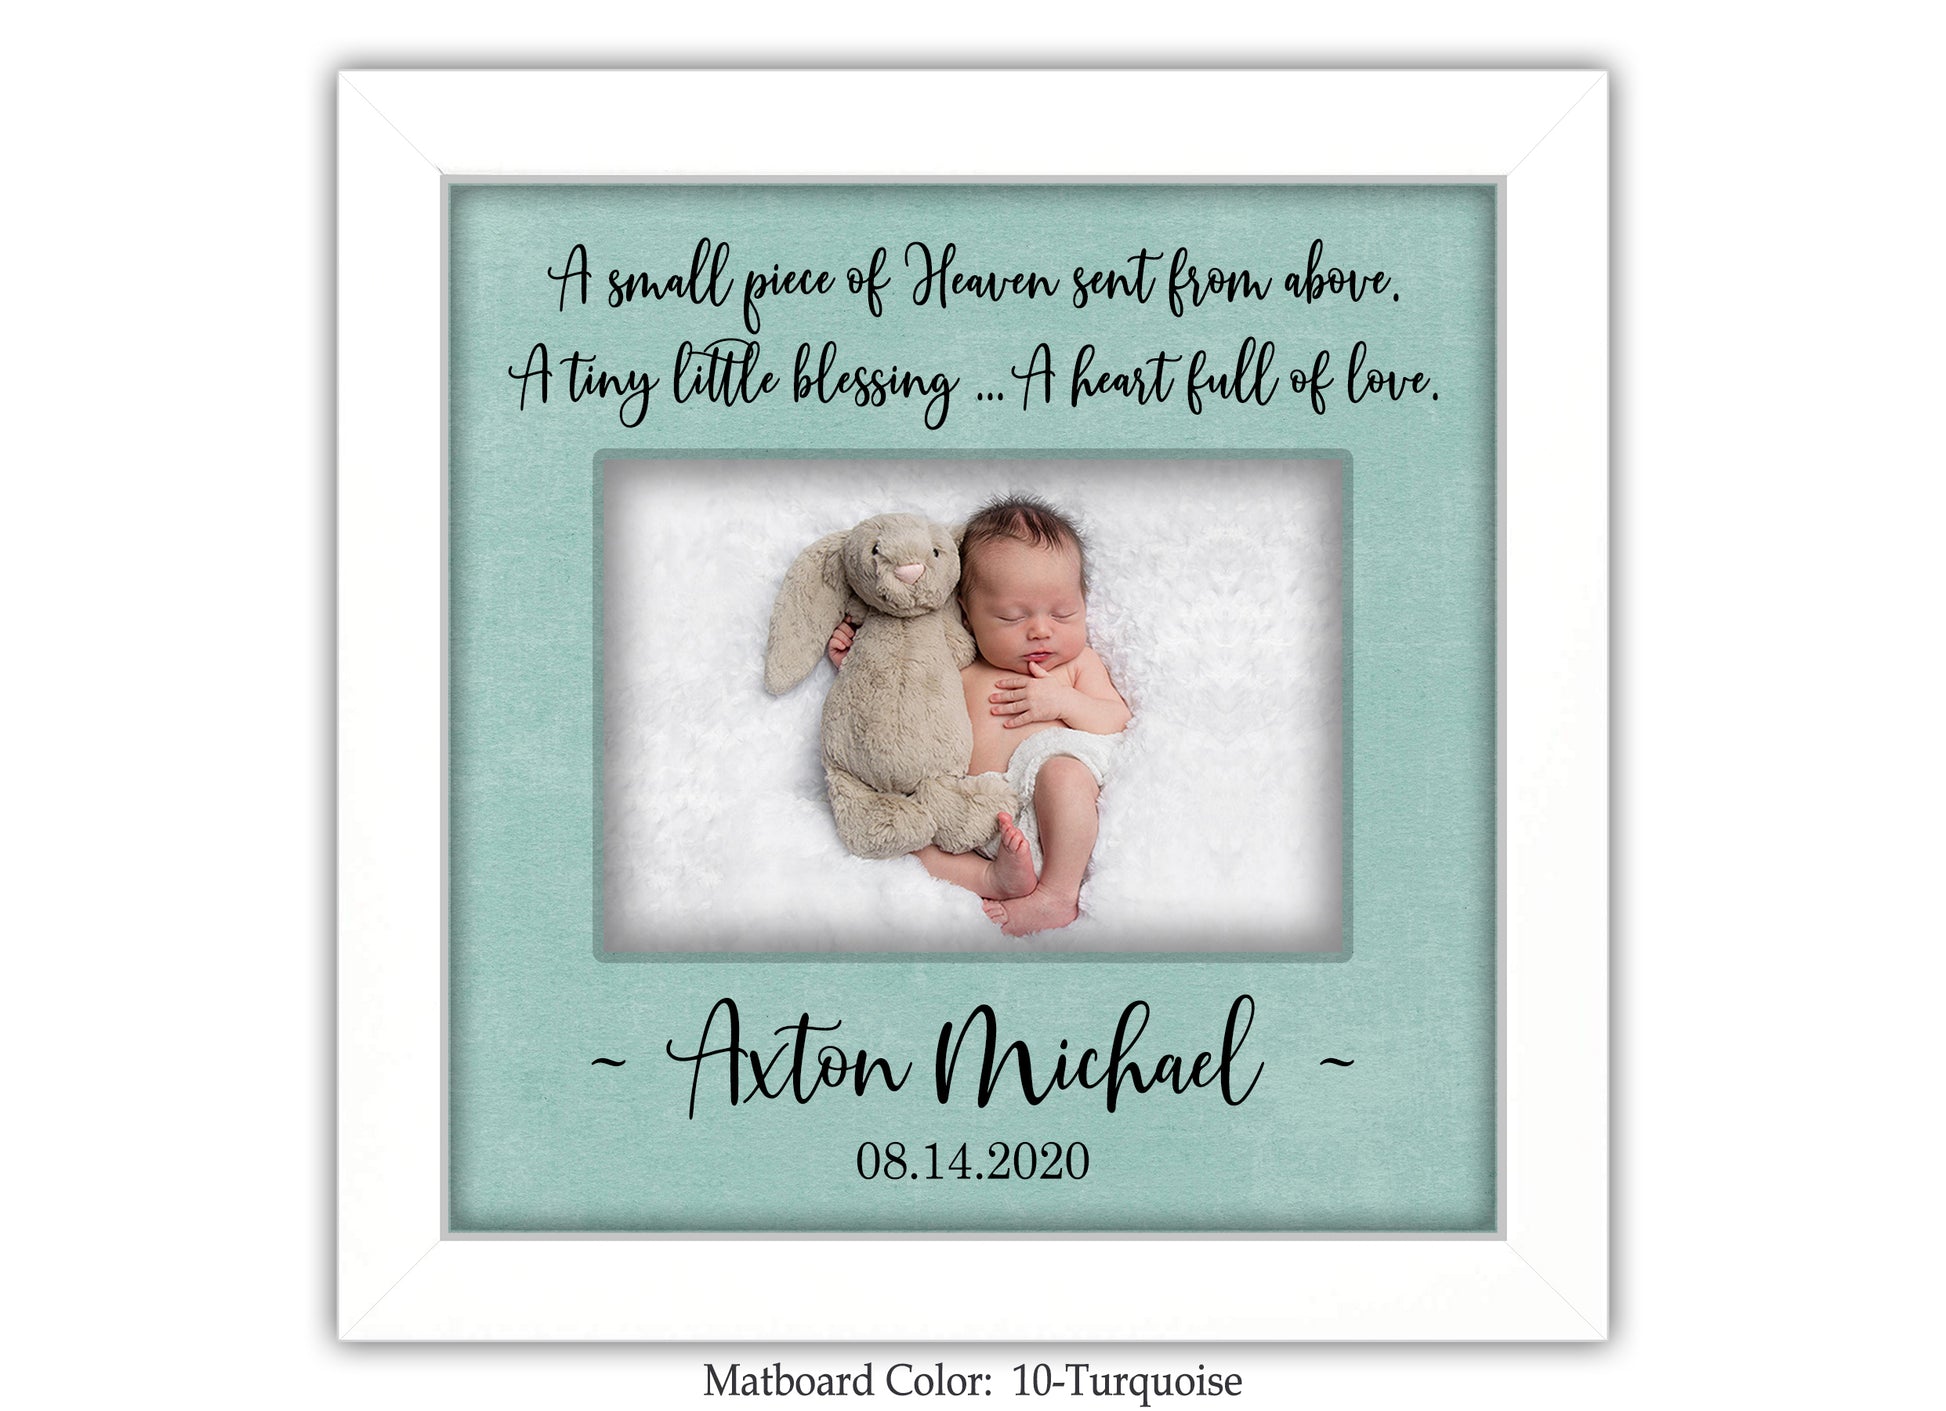 Personalized New Baby Photo Frame - New Baby Baptism Christening Gift, 8x8 Picture Frame MatboardMemories   